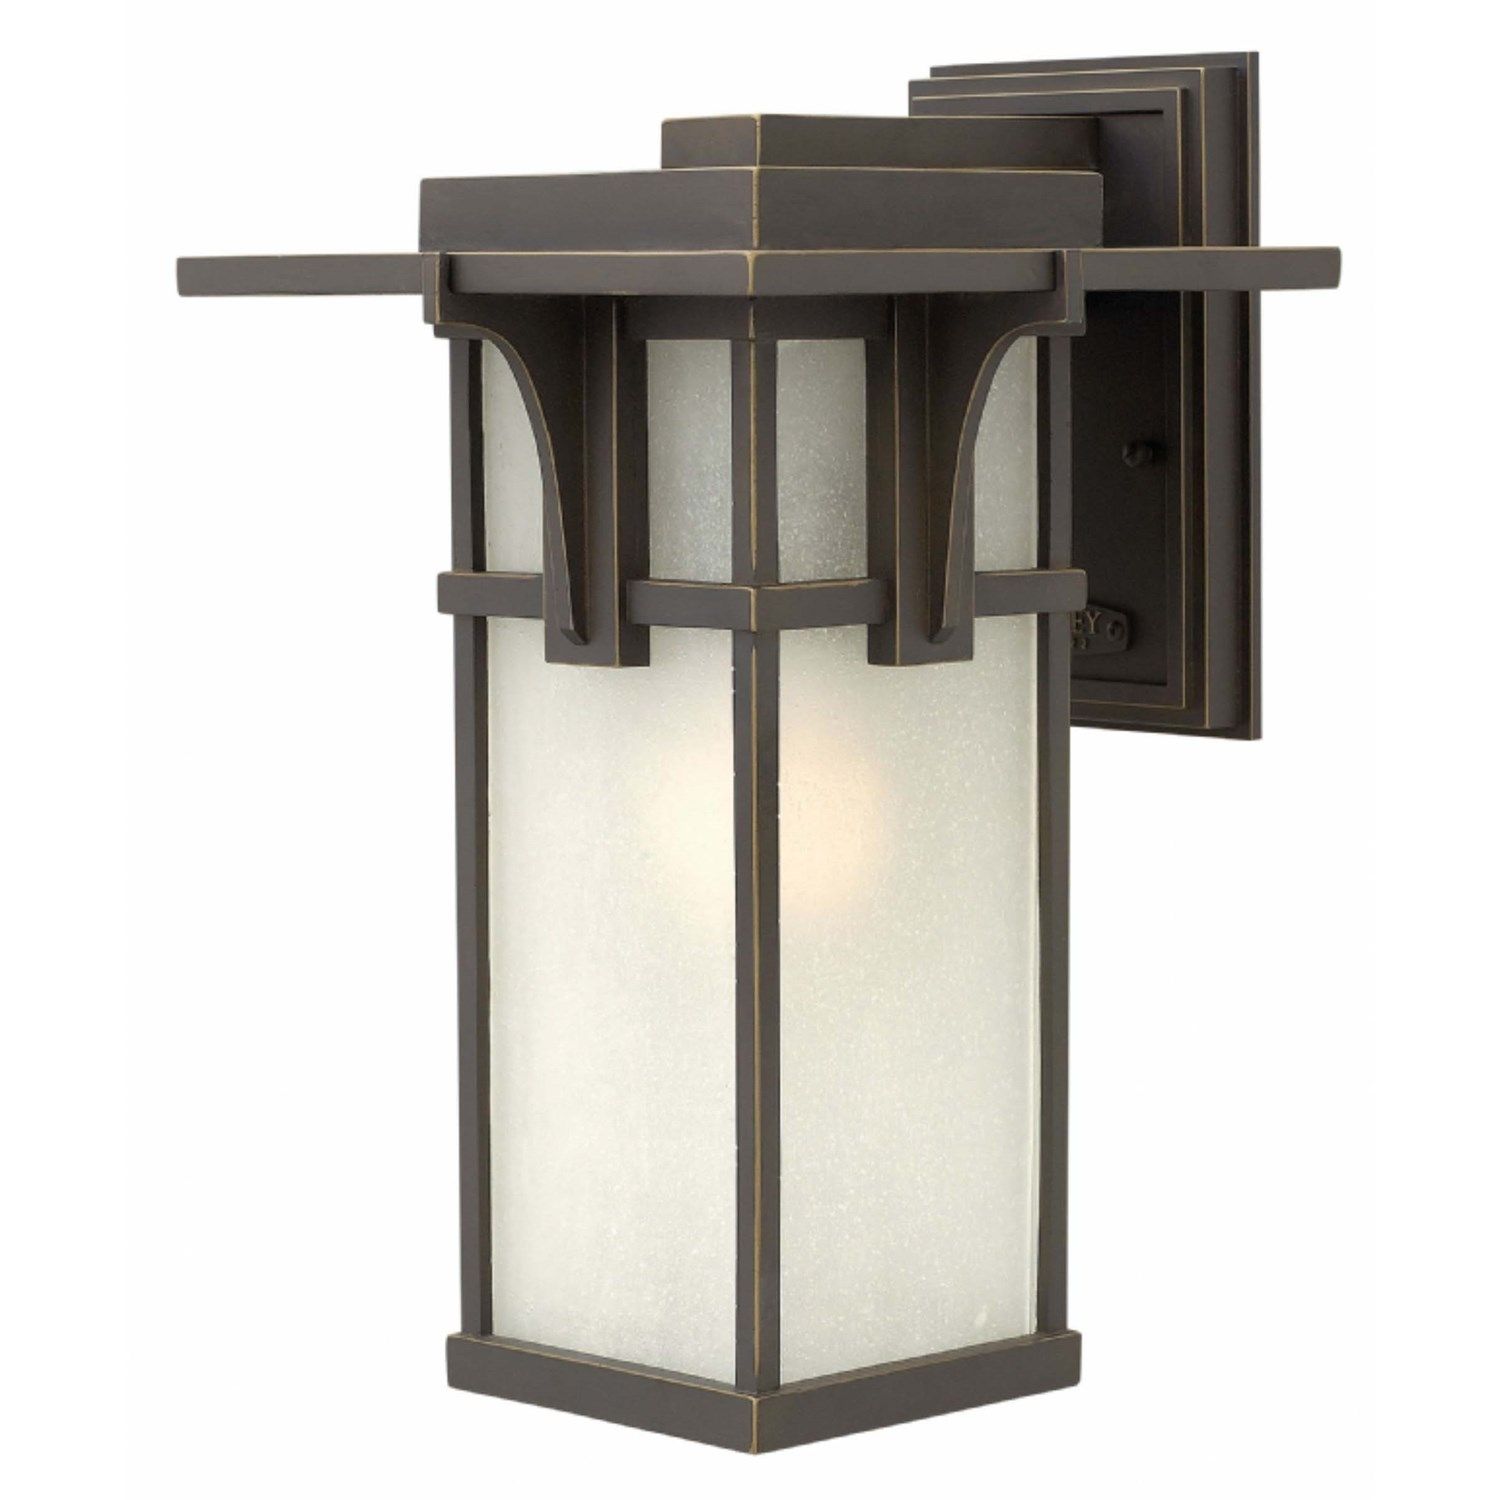 Outdoor Extra Large Wall Lantern Led Up Down Light Outdoorextra In Extra Large Outdoor Lanterns (View 7 of 20)